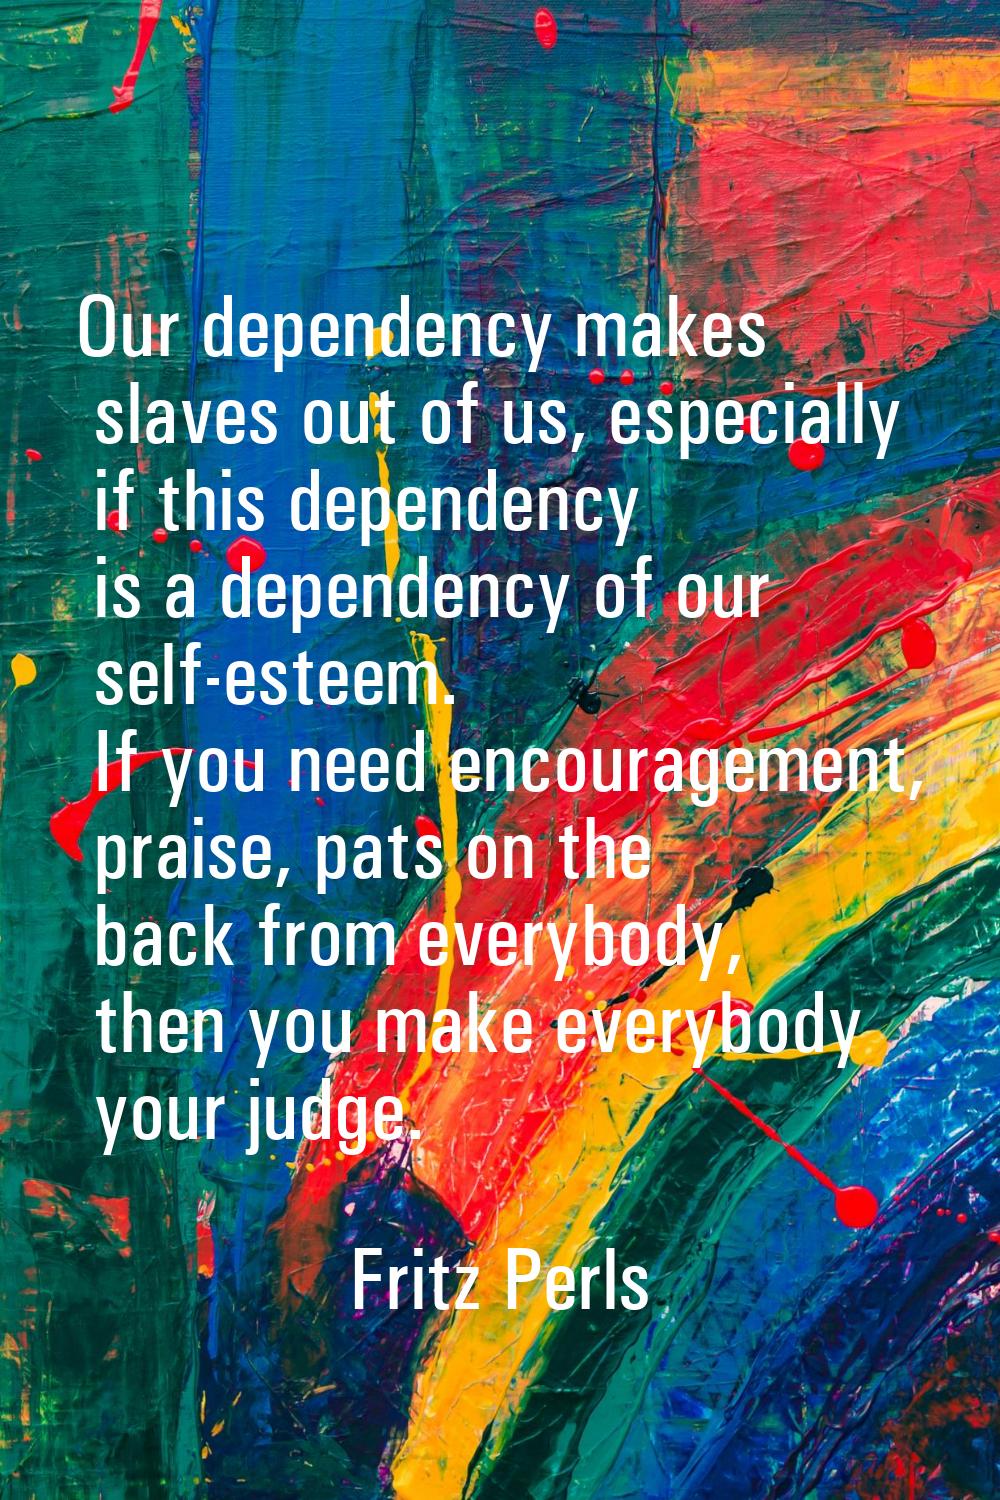 Our dependency makes slaves out of us, especially if this dependency is a dependency of our self-es